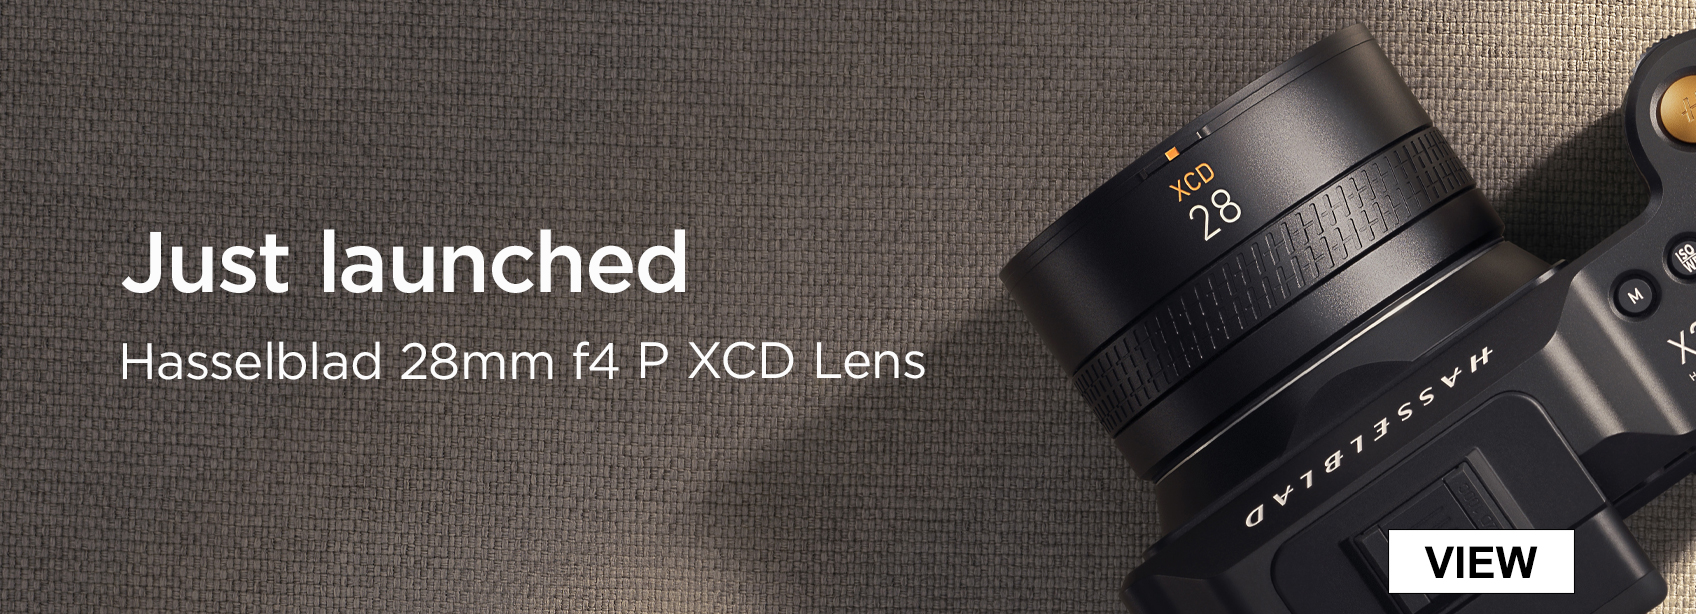 Just launched. Hasselblad 28mm f4 P XCD Lens